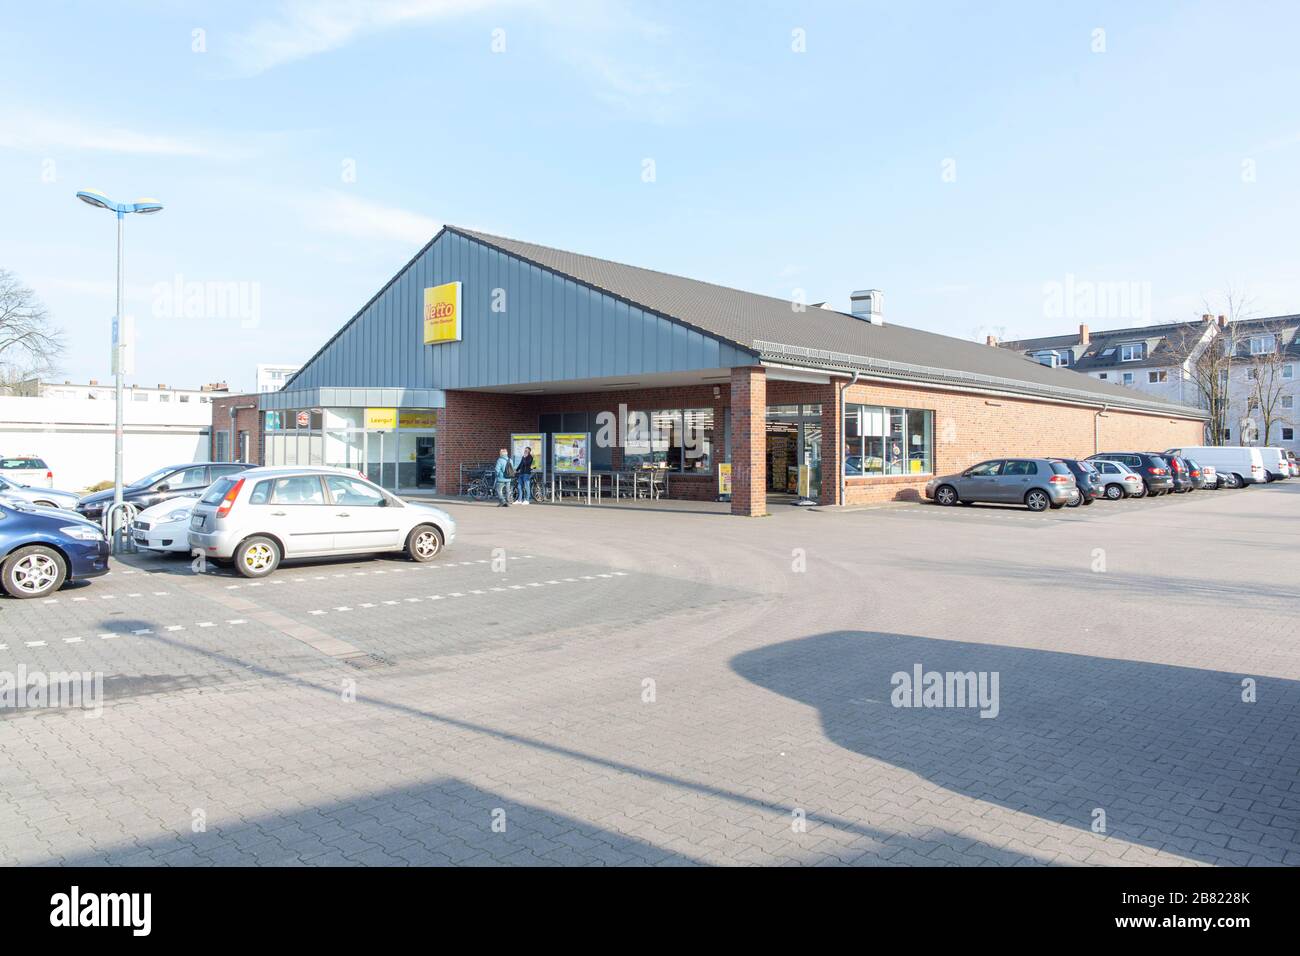 Hannover, Germany, 16.03.2020: Storefront of a Netto supermarket in Vahrenwald with daylight and blue sky. Stock Photo